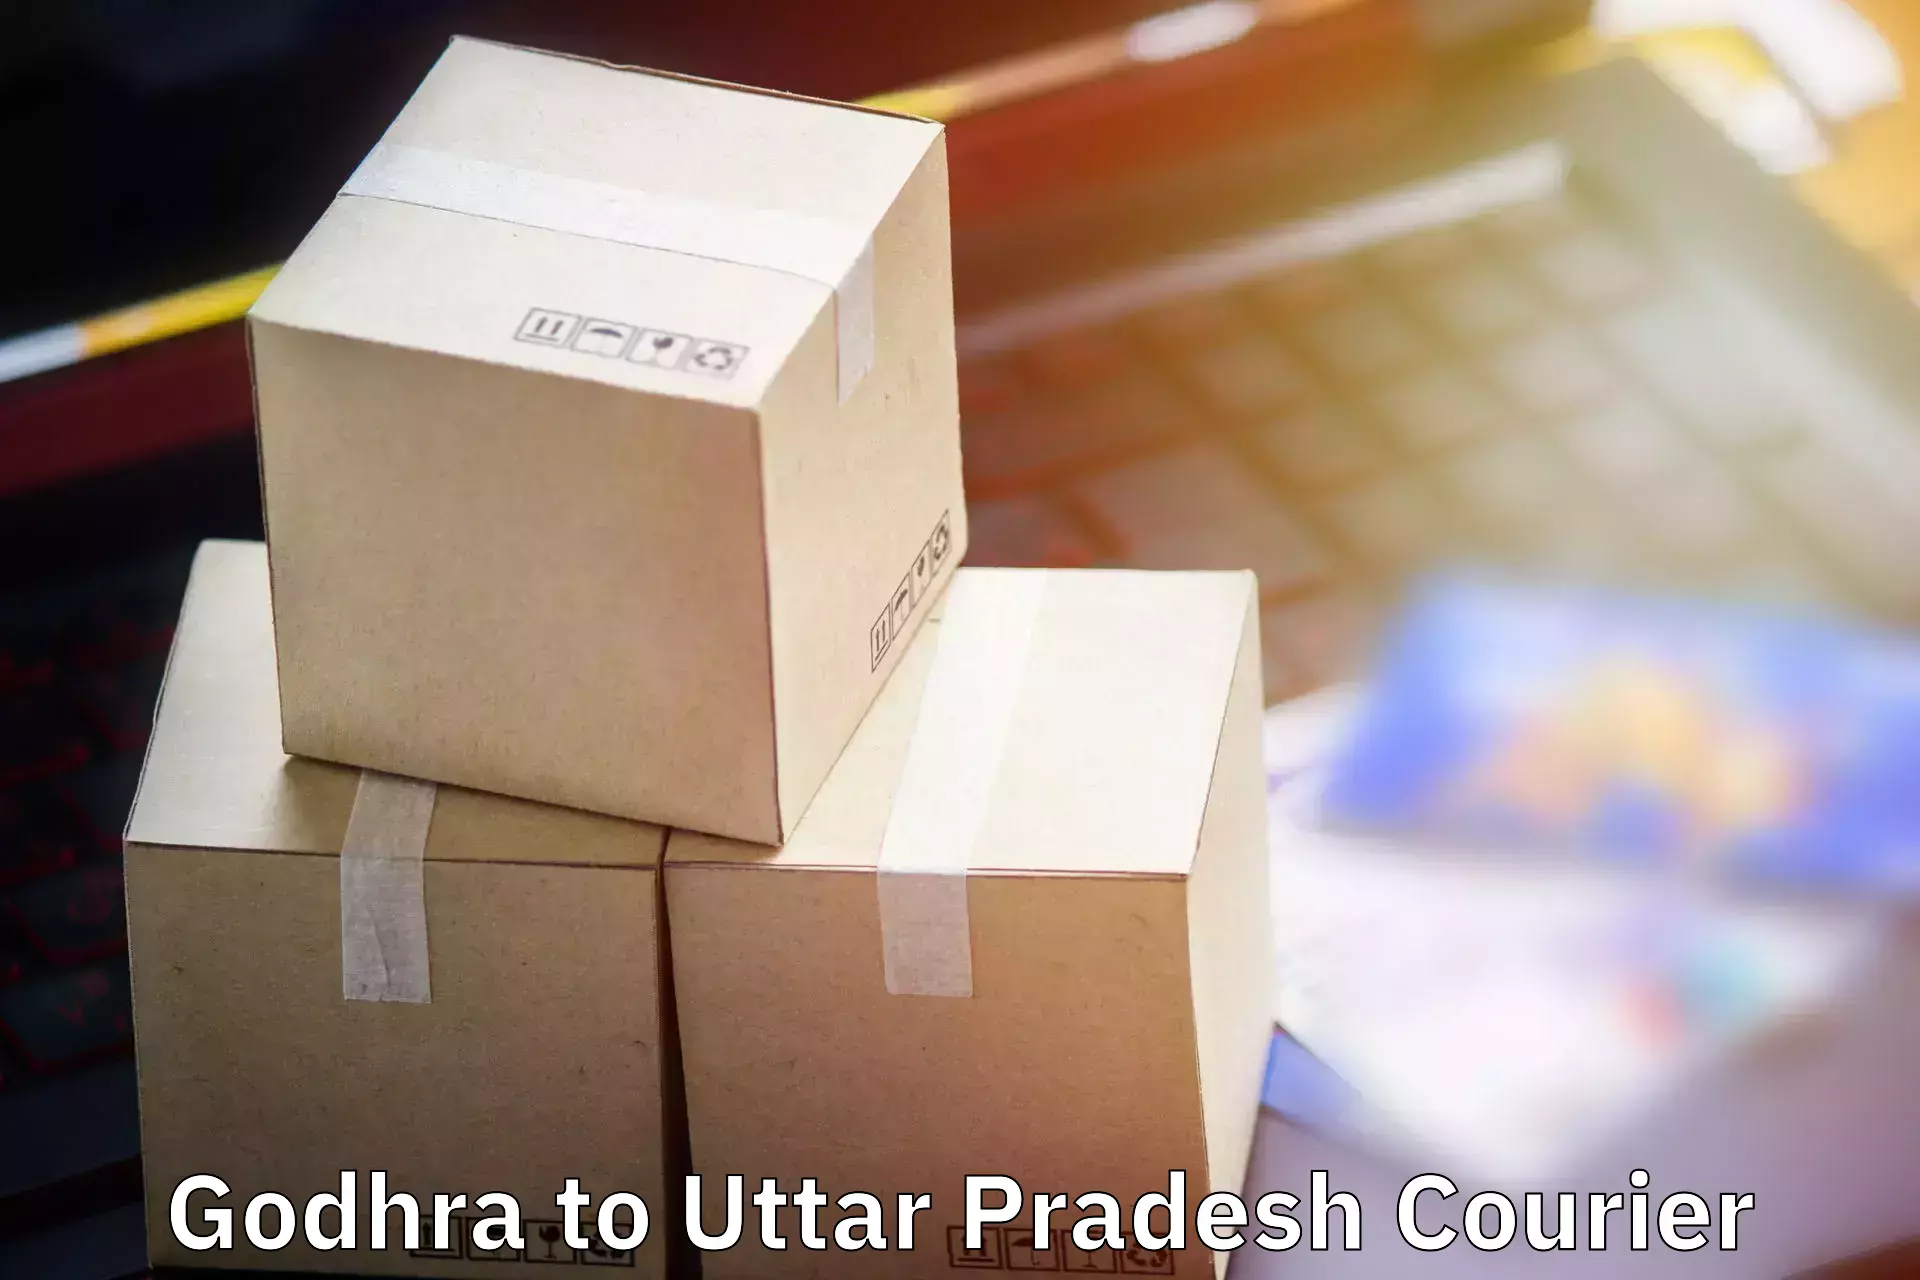 Personal effects shipping in Godhra to Jalesar